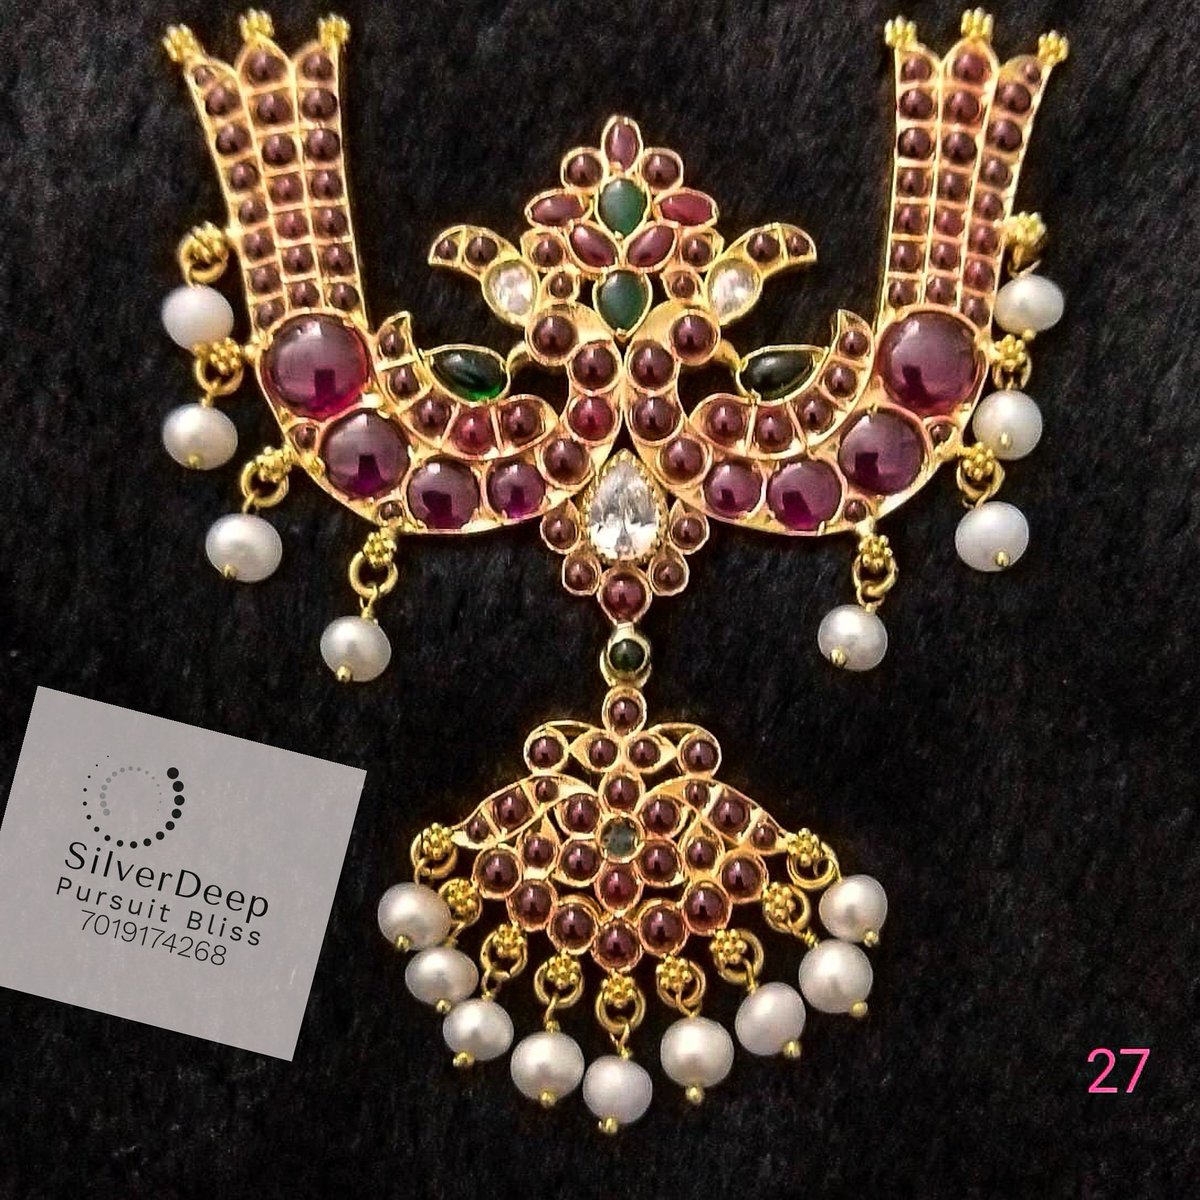 #exquisitejewelry #intricatedesign #bejeweledjewelry #specialoccasions #heavypendant #antiquependant #redstonejewelry #kundanpendant

#goldplatedsilverjewelry #jewelrydesign #antique925silver #silverjewelry #925antiquesilver

#SILVER DEEP

#7019174268 call-text-whatsapp